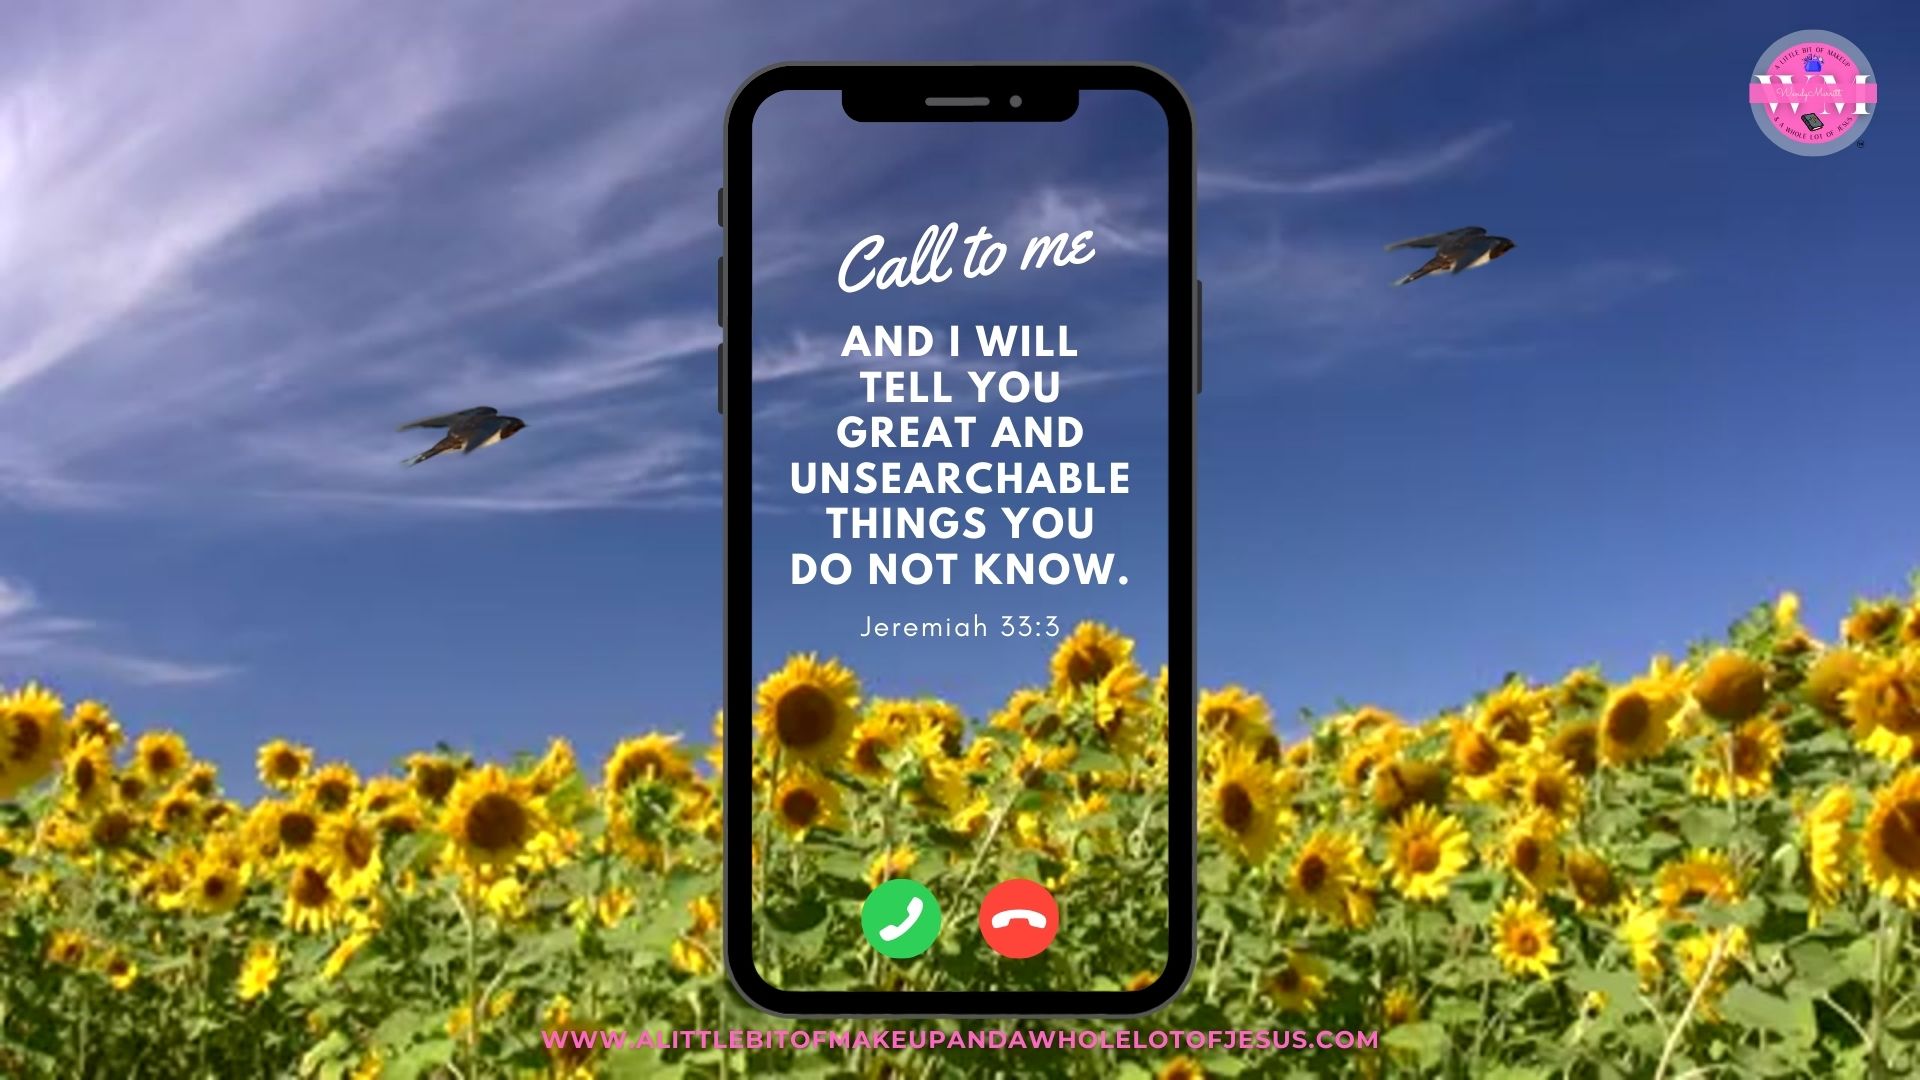 Video: Call to me and I will answer you and tell you great and unsearchable things you do not know.  Jeremiah 33:3